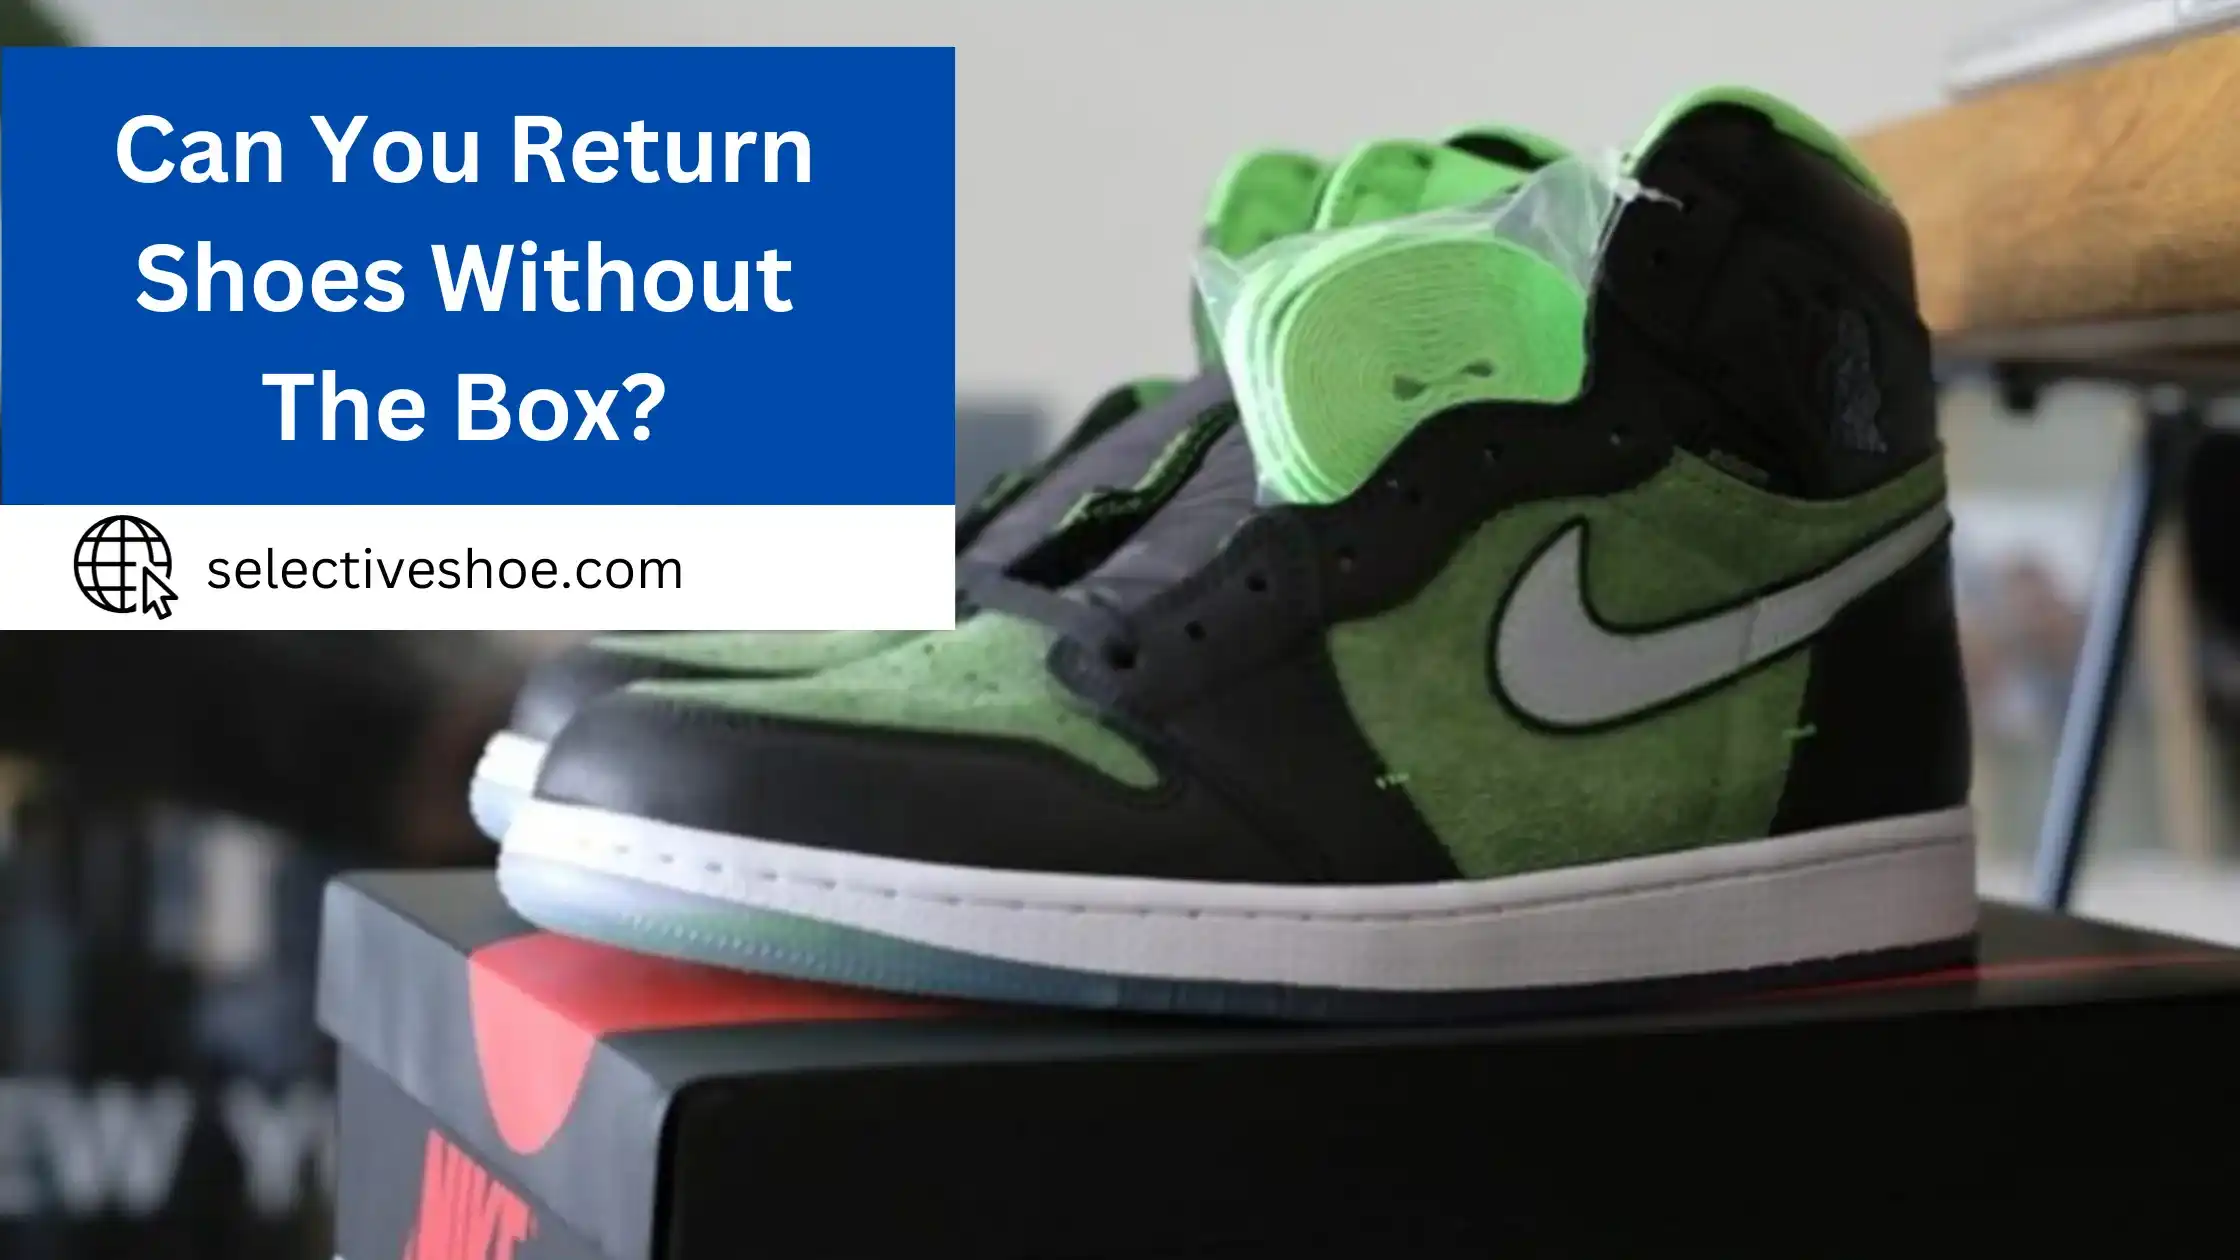 Can You Return Shoes Without The Box? Detailed Information